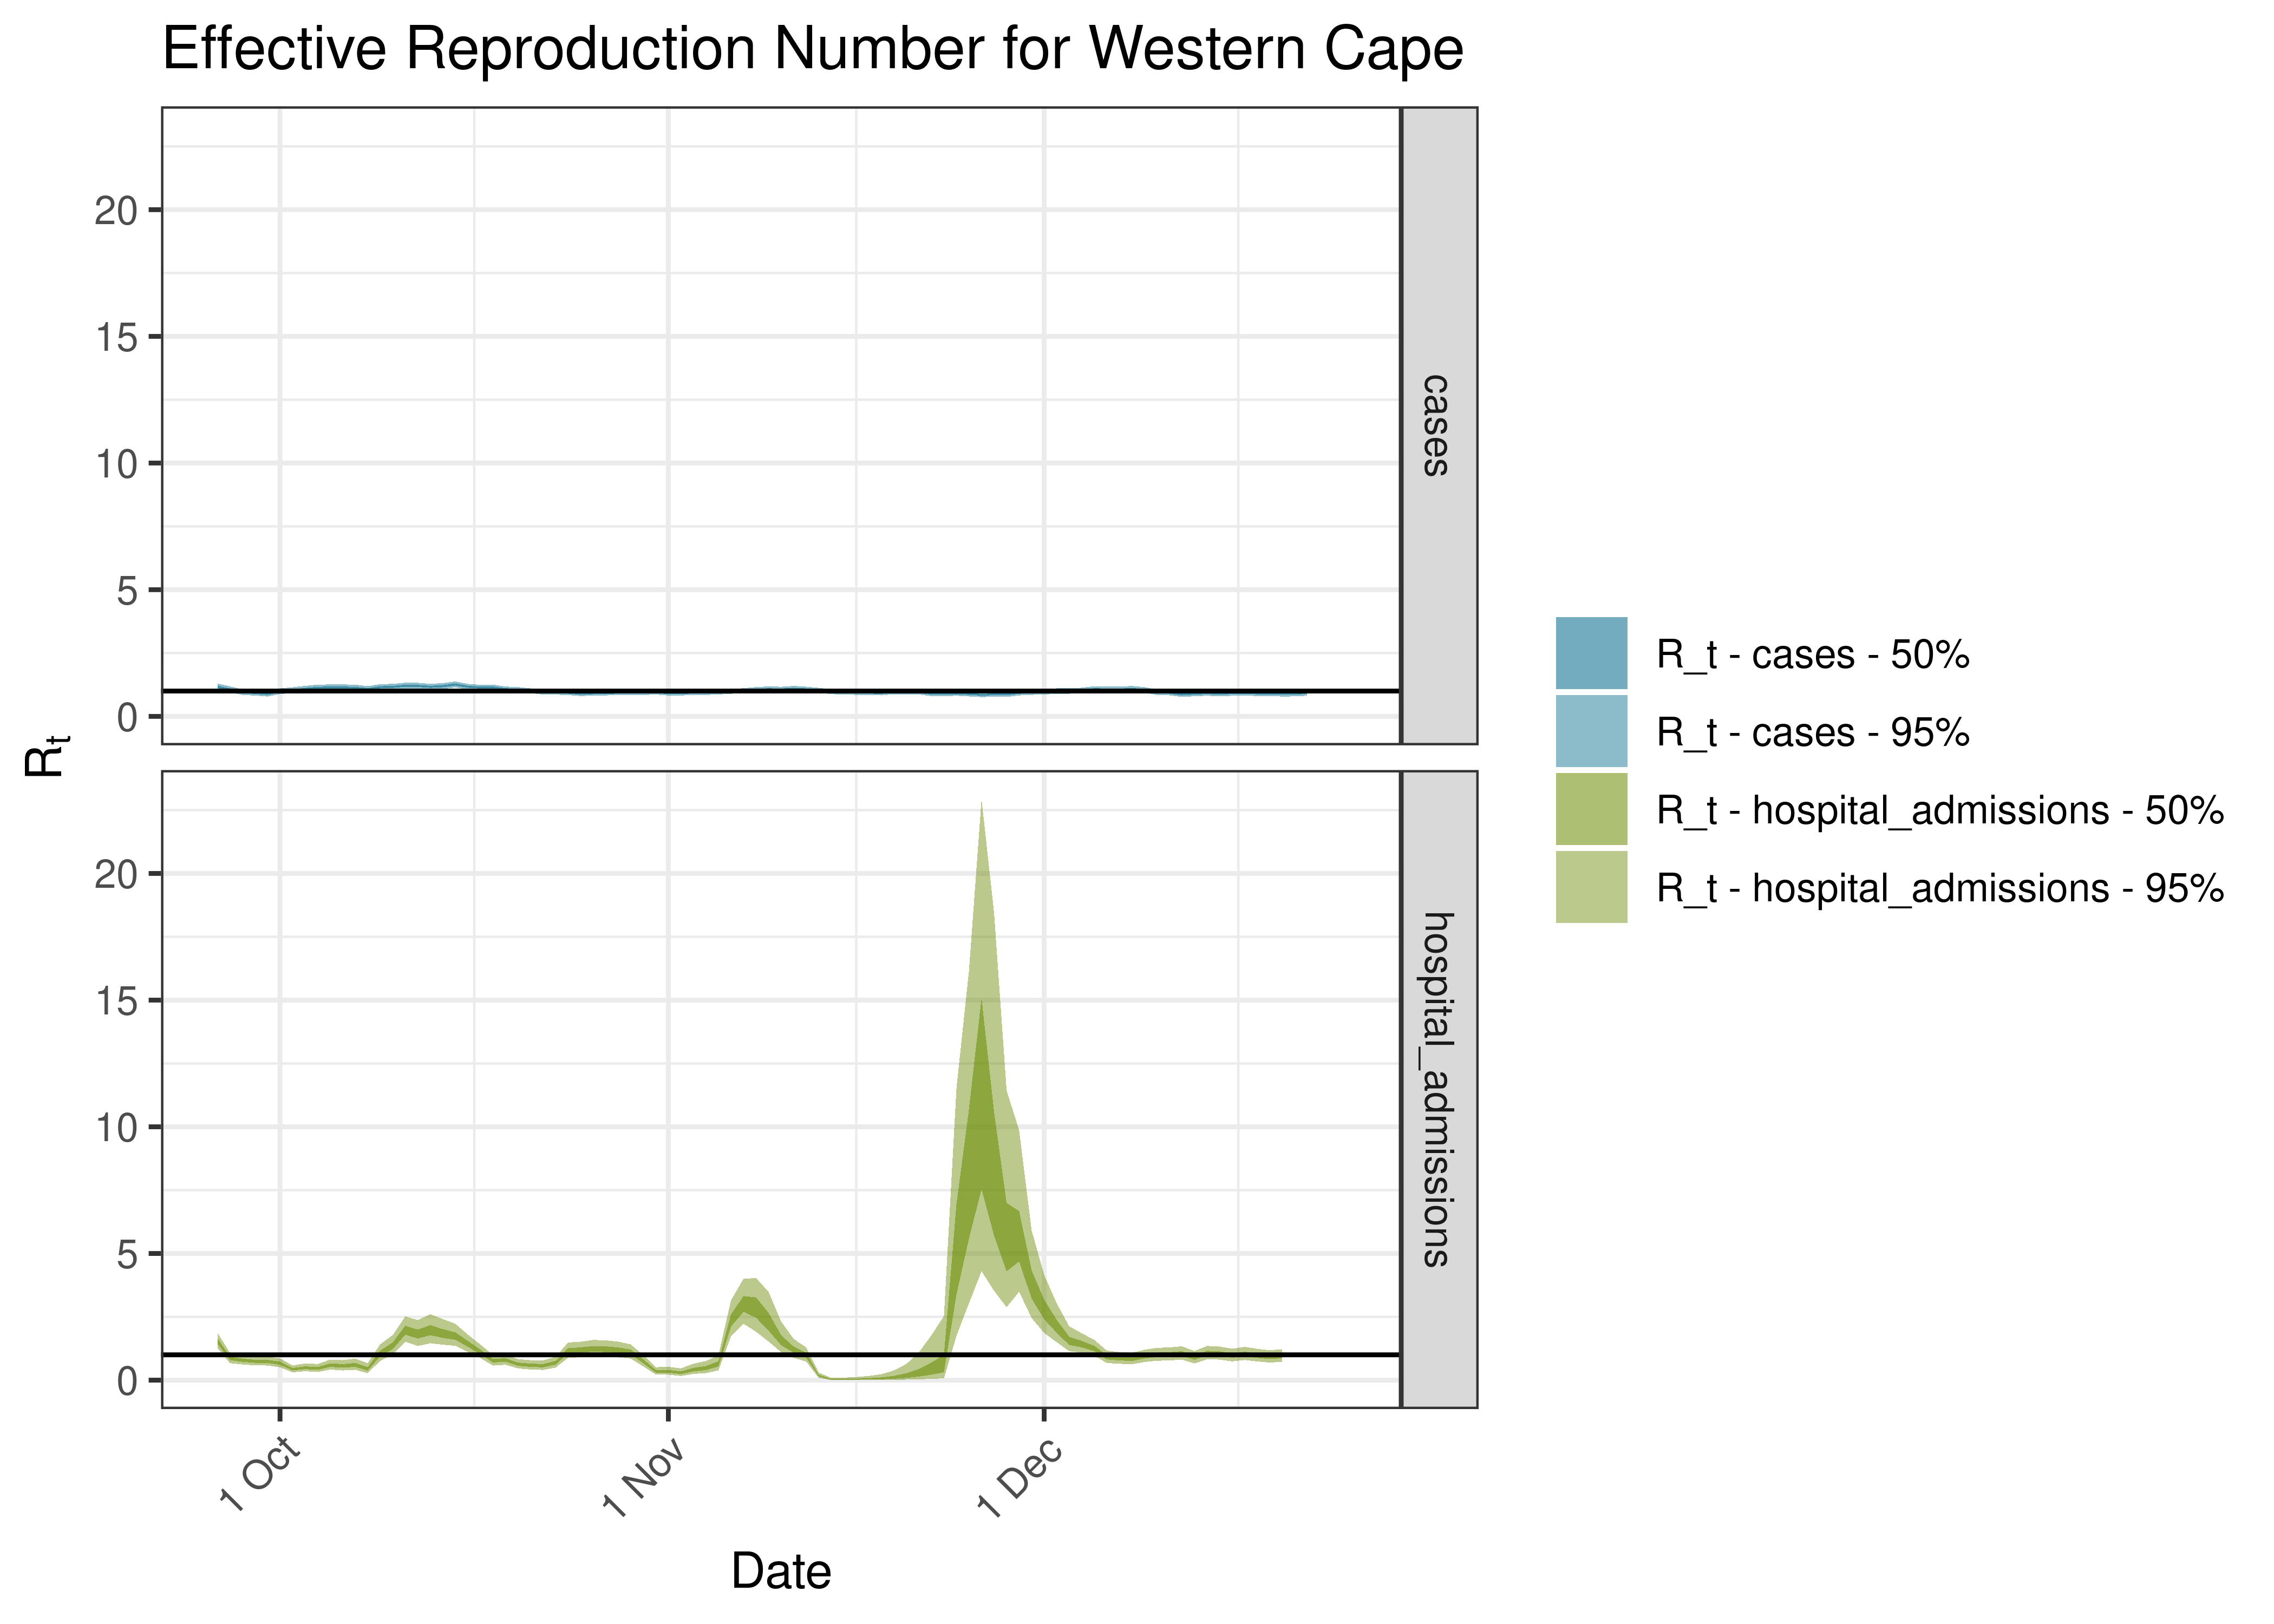 Estimated Effective Reproduction Number for Western Cape over last 90 days